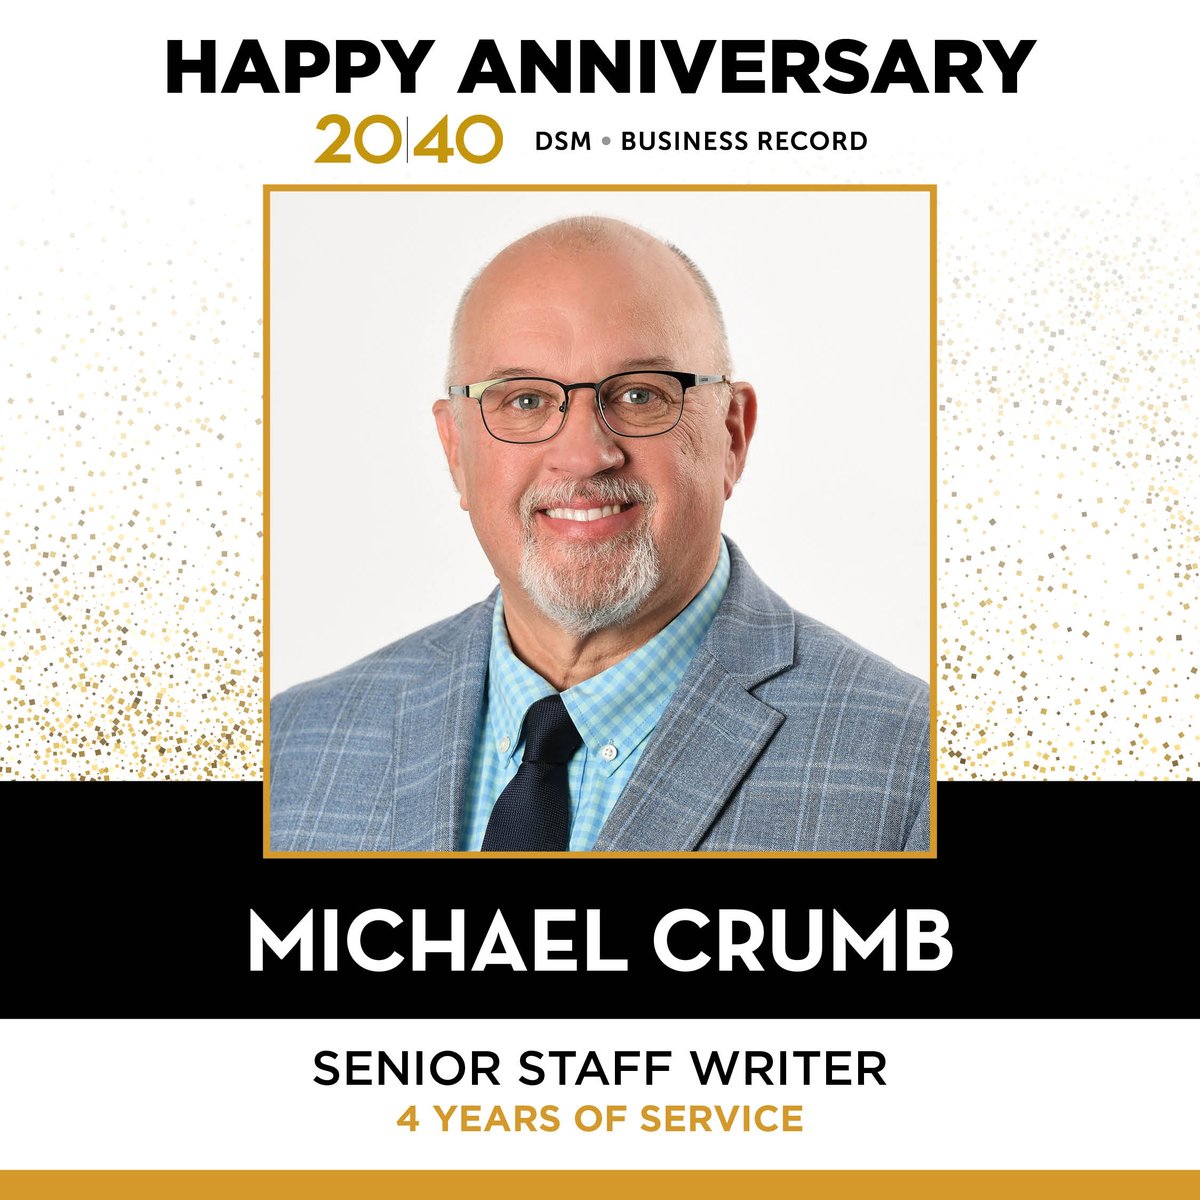 Happy anniversary to Michael Crumb, who is celebrating four years with Business Publications Corporation today!